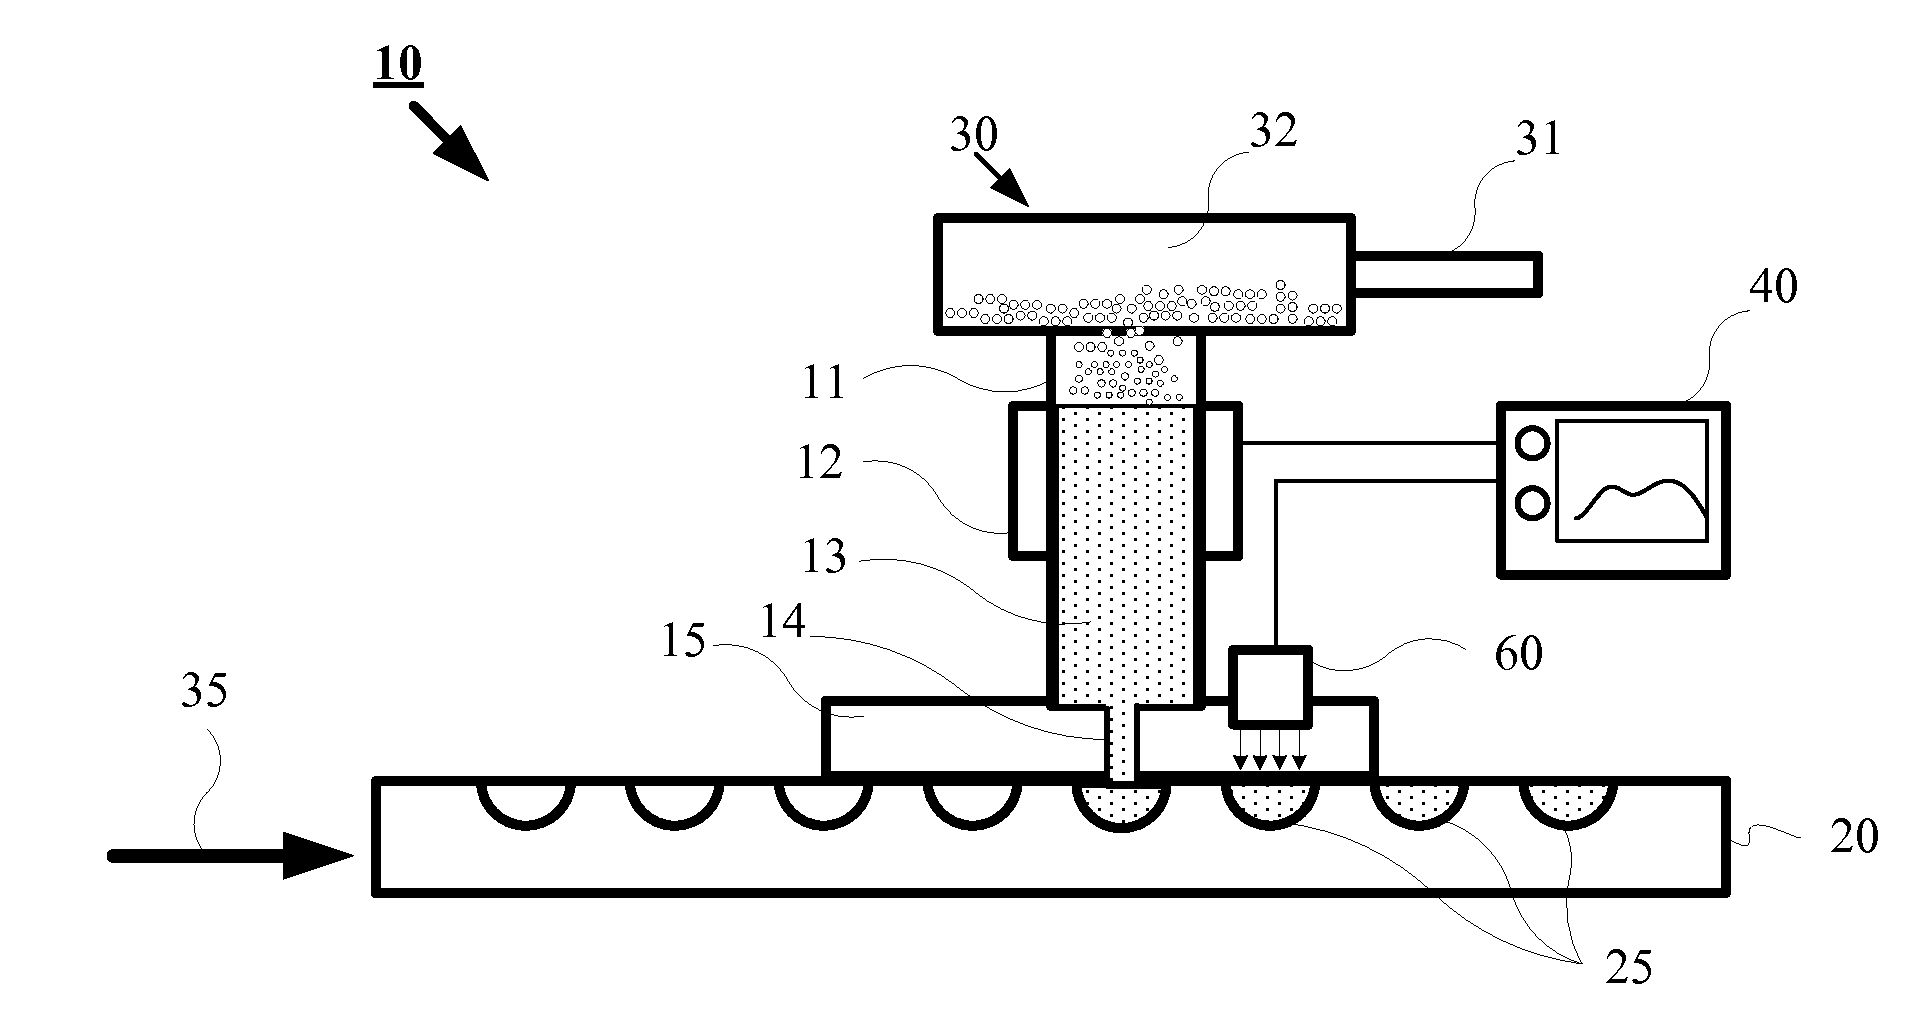 Enhanced separation of injection molded microlenses for high volume manufacturing